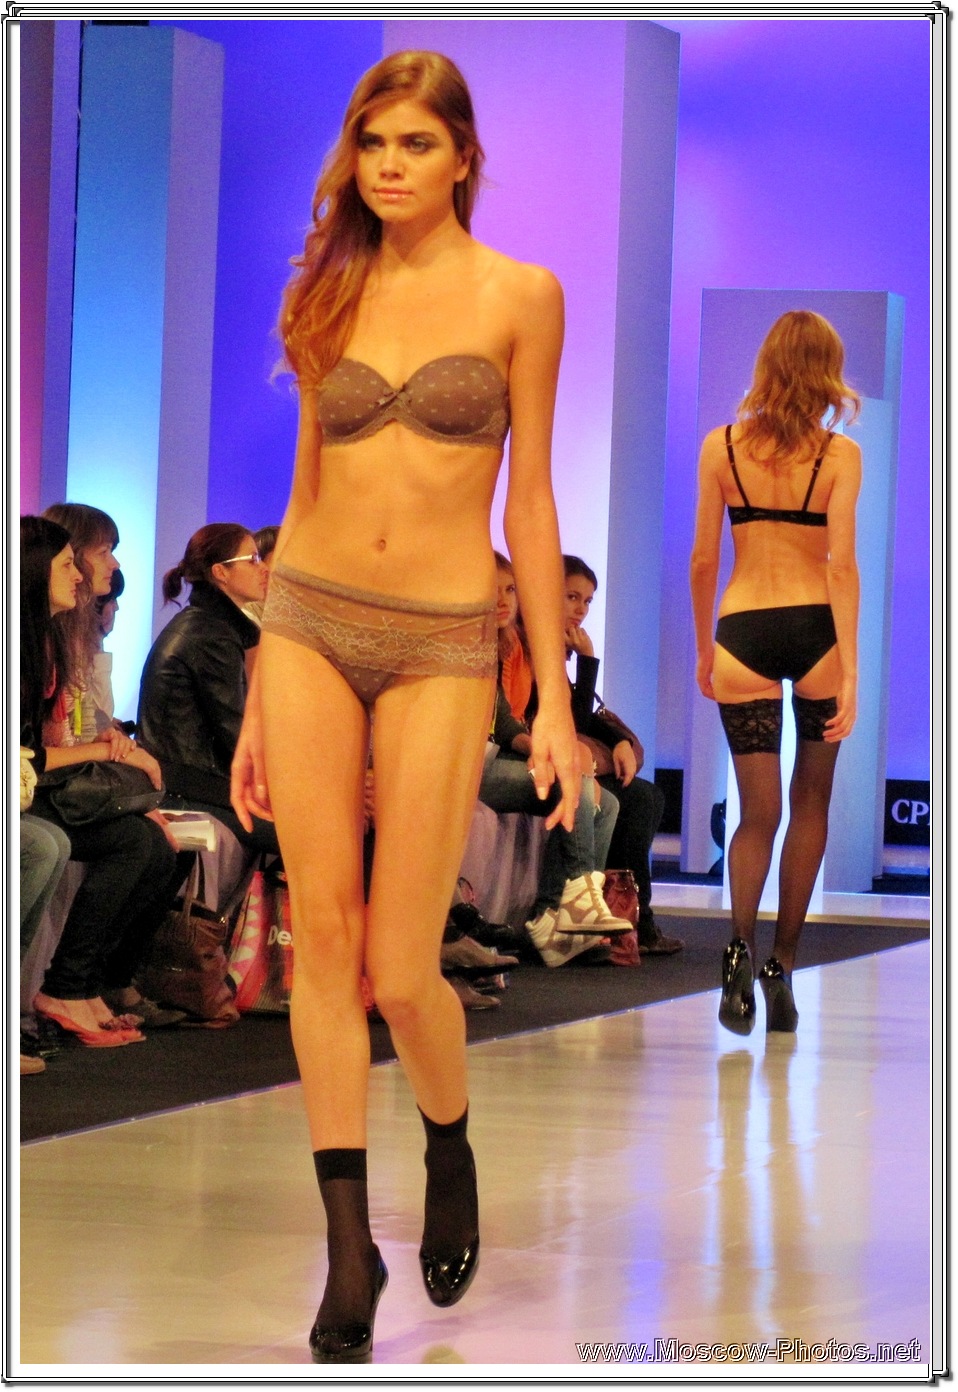 CPM Collection Premiere Moscow  - Lingerie Fashion Show  